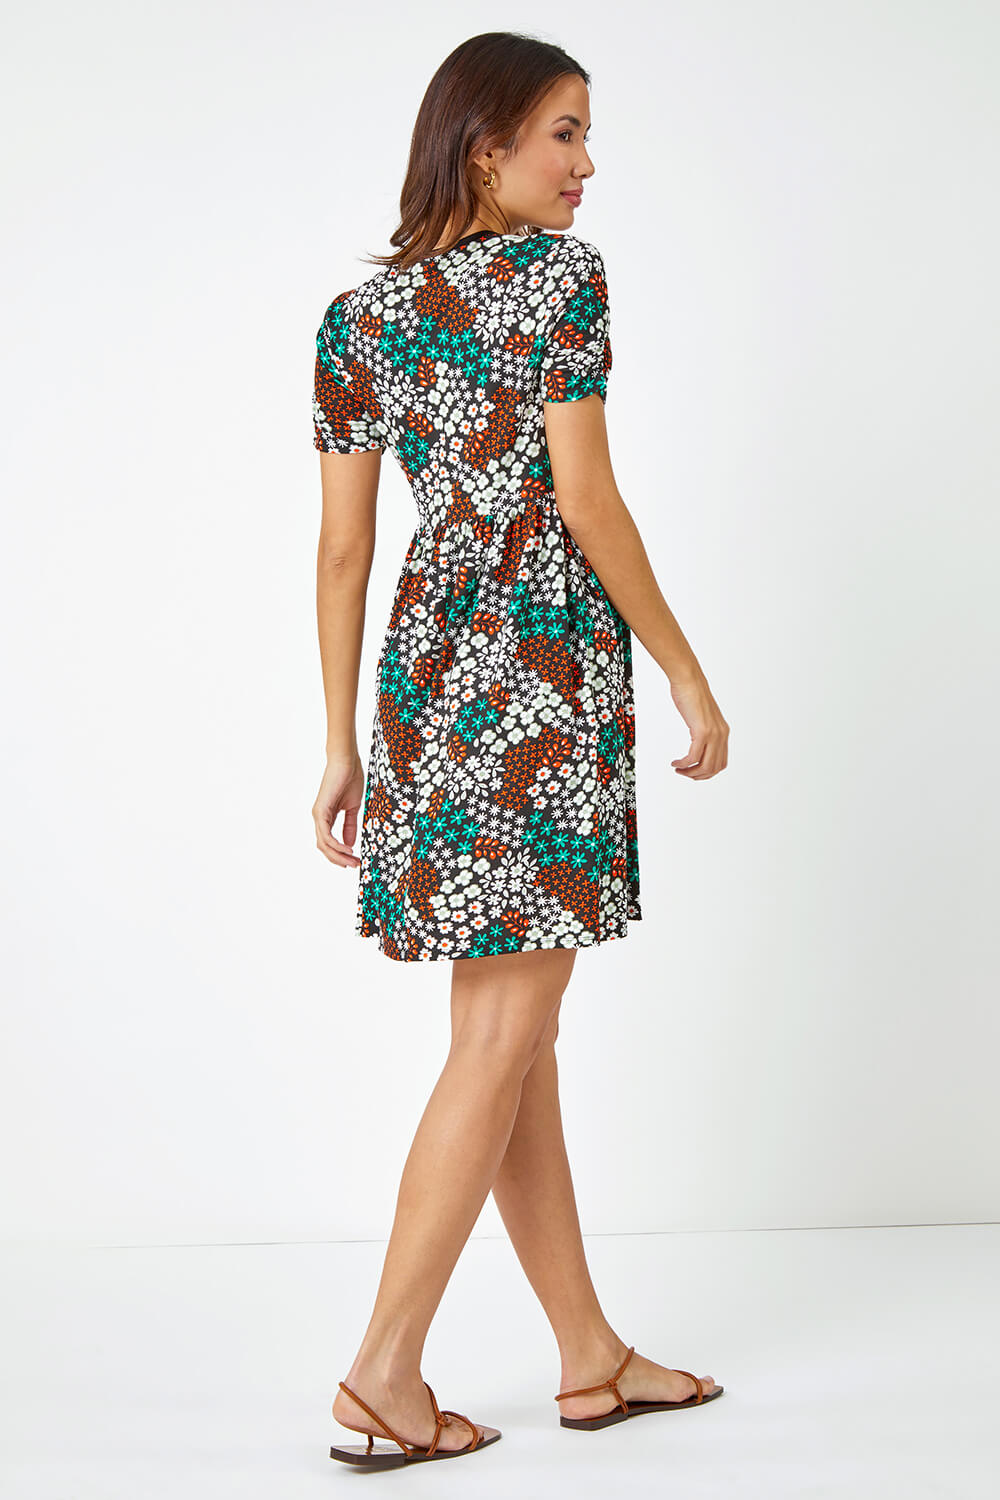 Green Floral Print Stretch Jersey Dress, Image 3 of 5